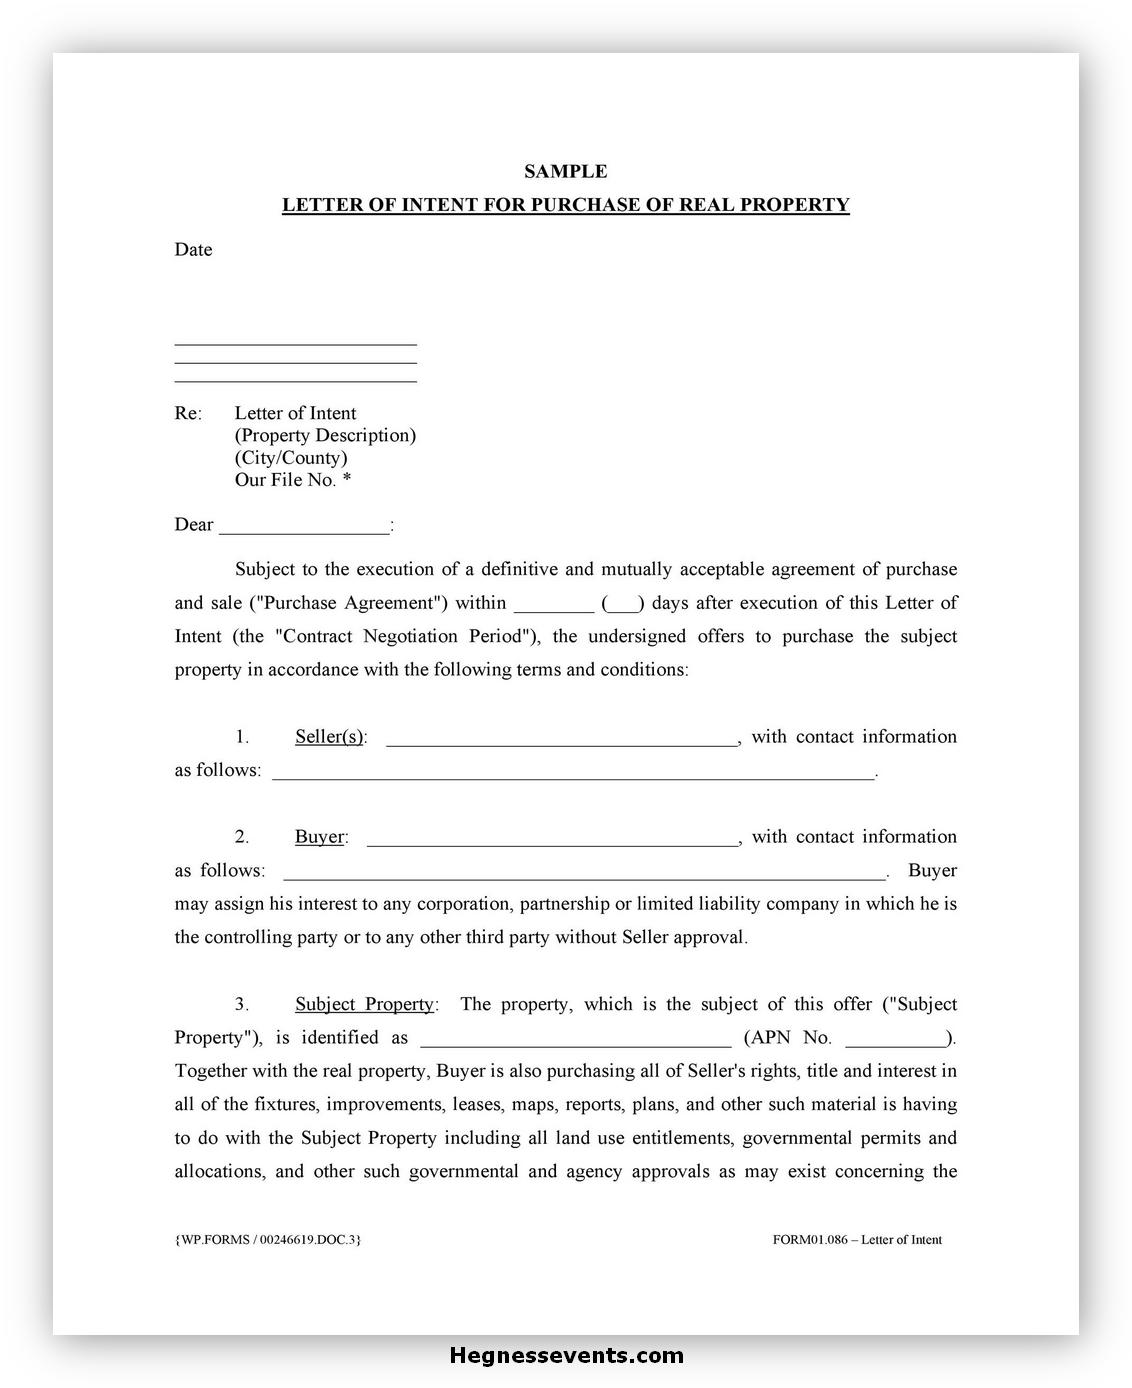 Sample Letter of Intent 12